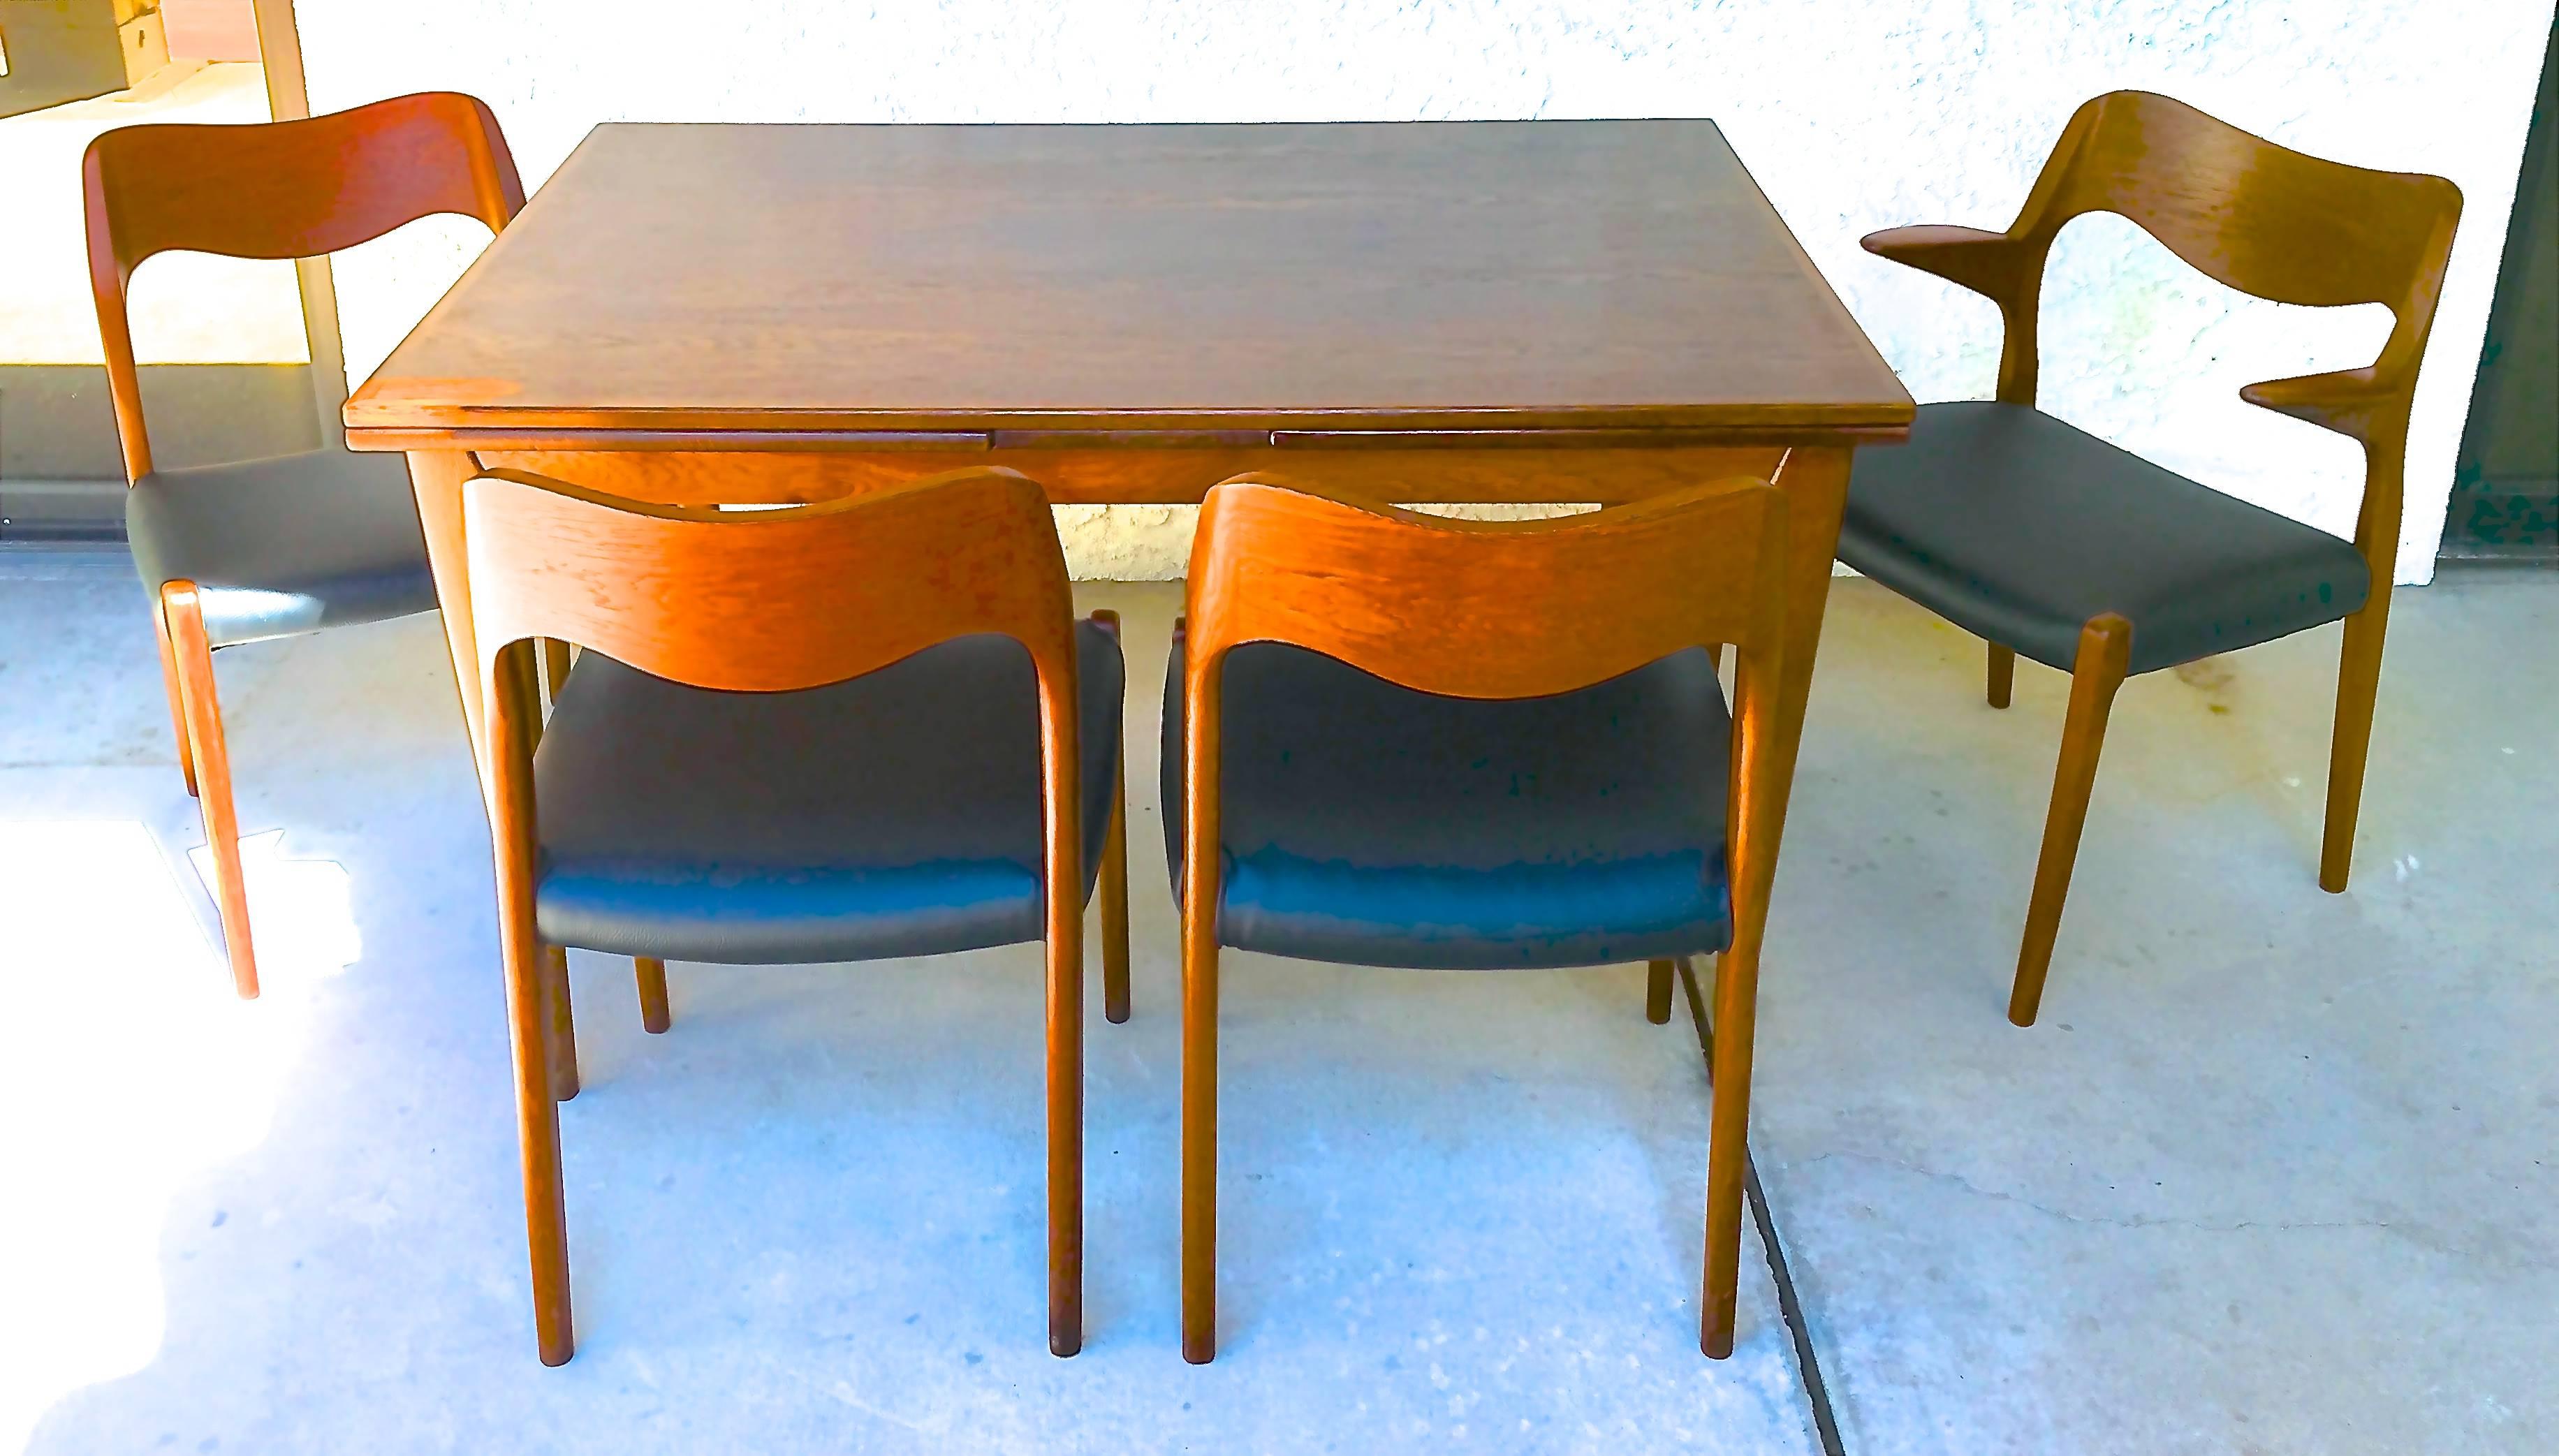 Exquisite rosewood dining table, circa 1950s designed by Niels Otto Møller for Danish Furniture Company. Table is model no. 12 and seats four-six, extending each end to seat up to ten. Set includes four rosewood chairs in black leatherette - three